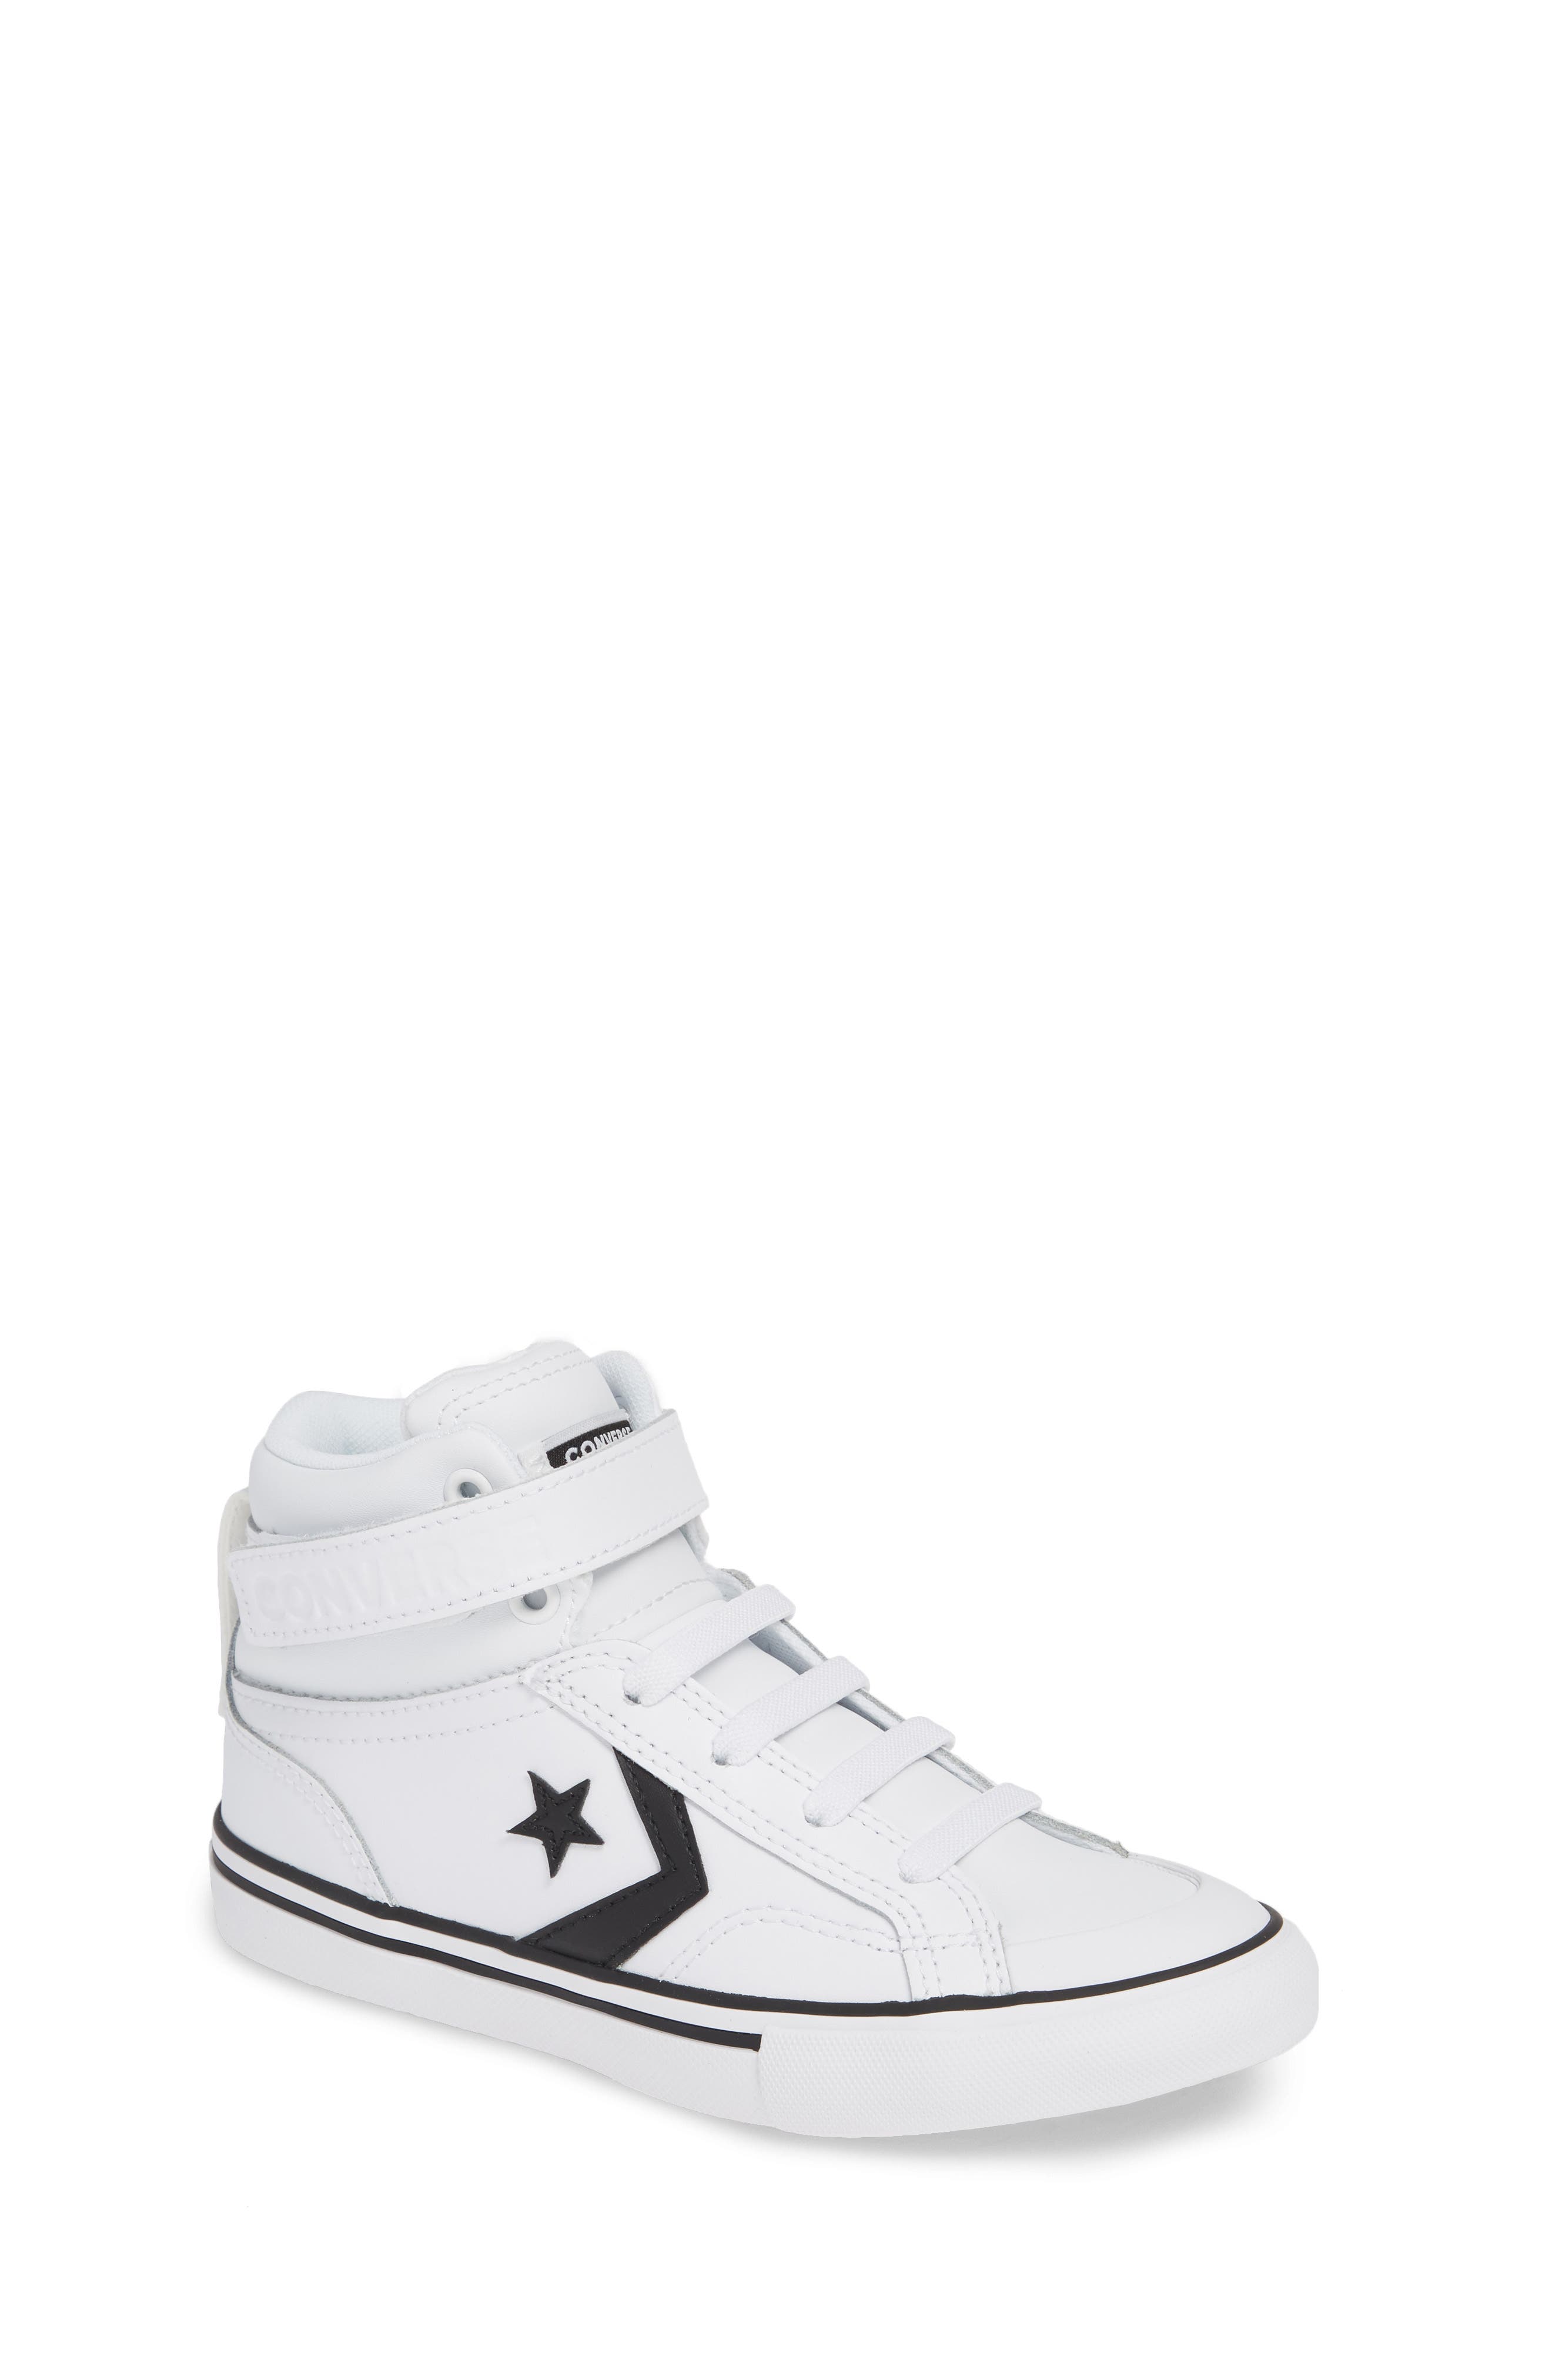 white converse youth size 4